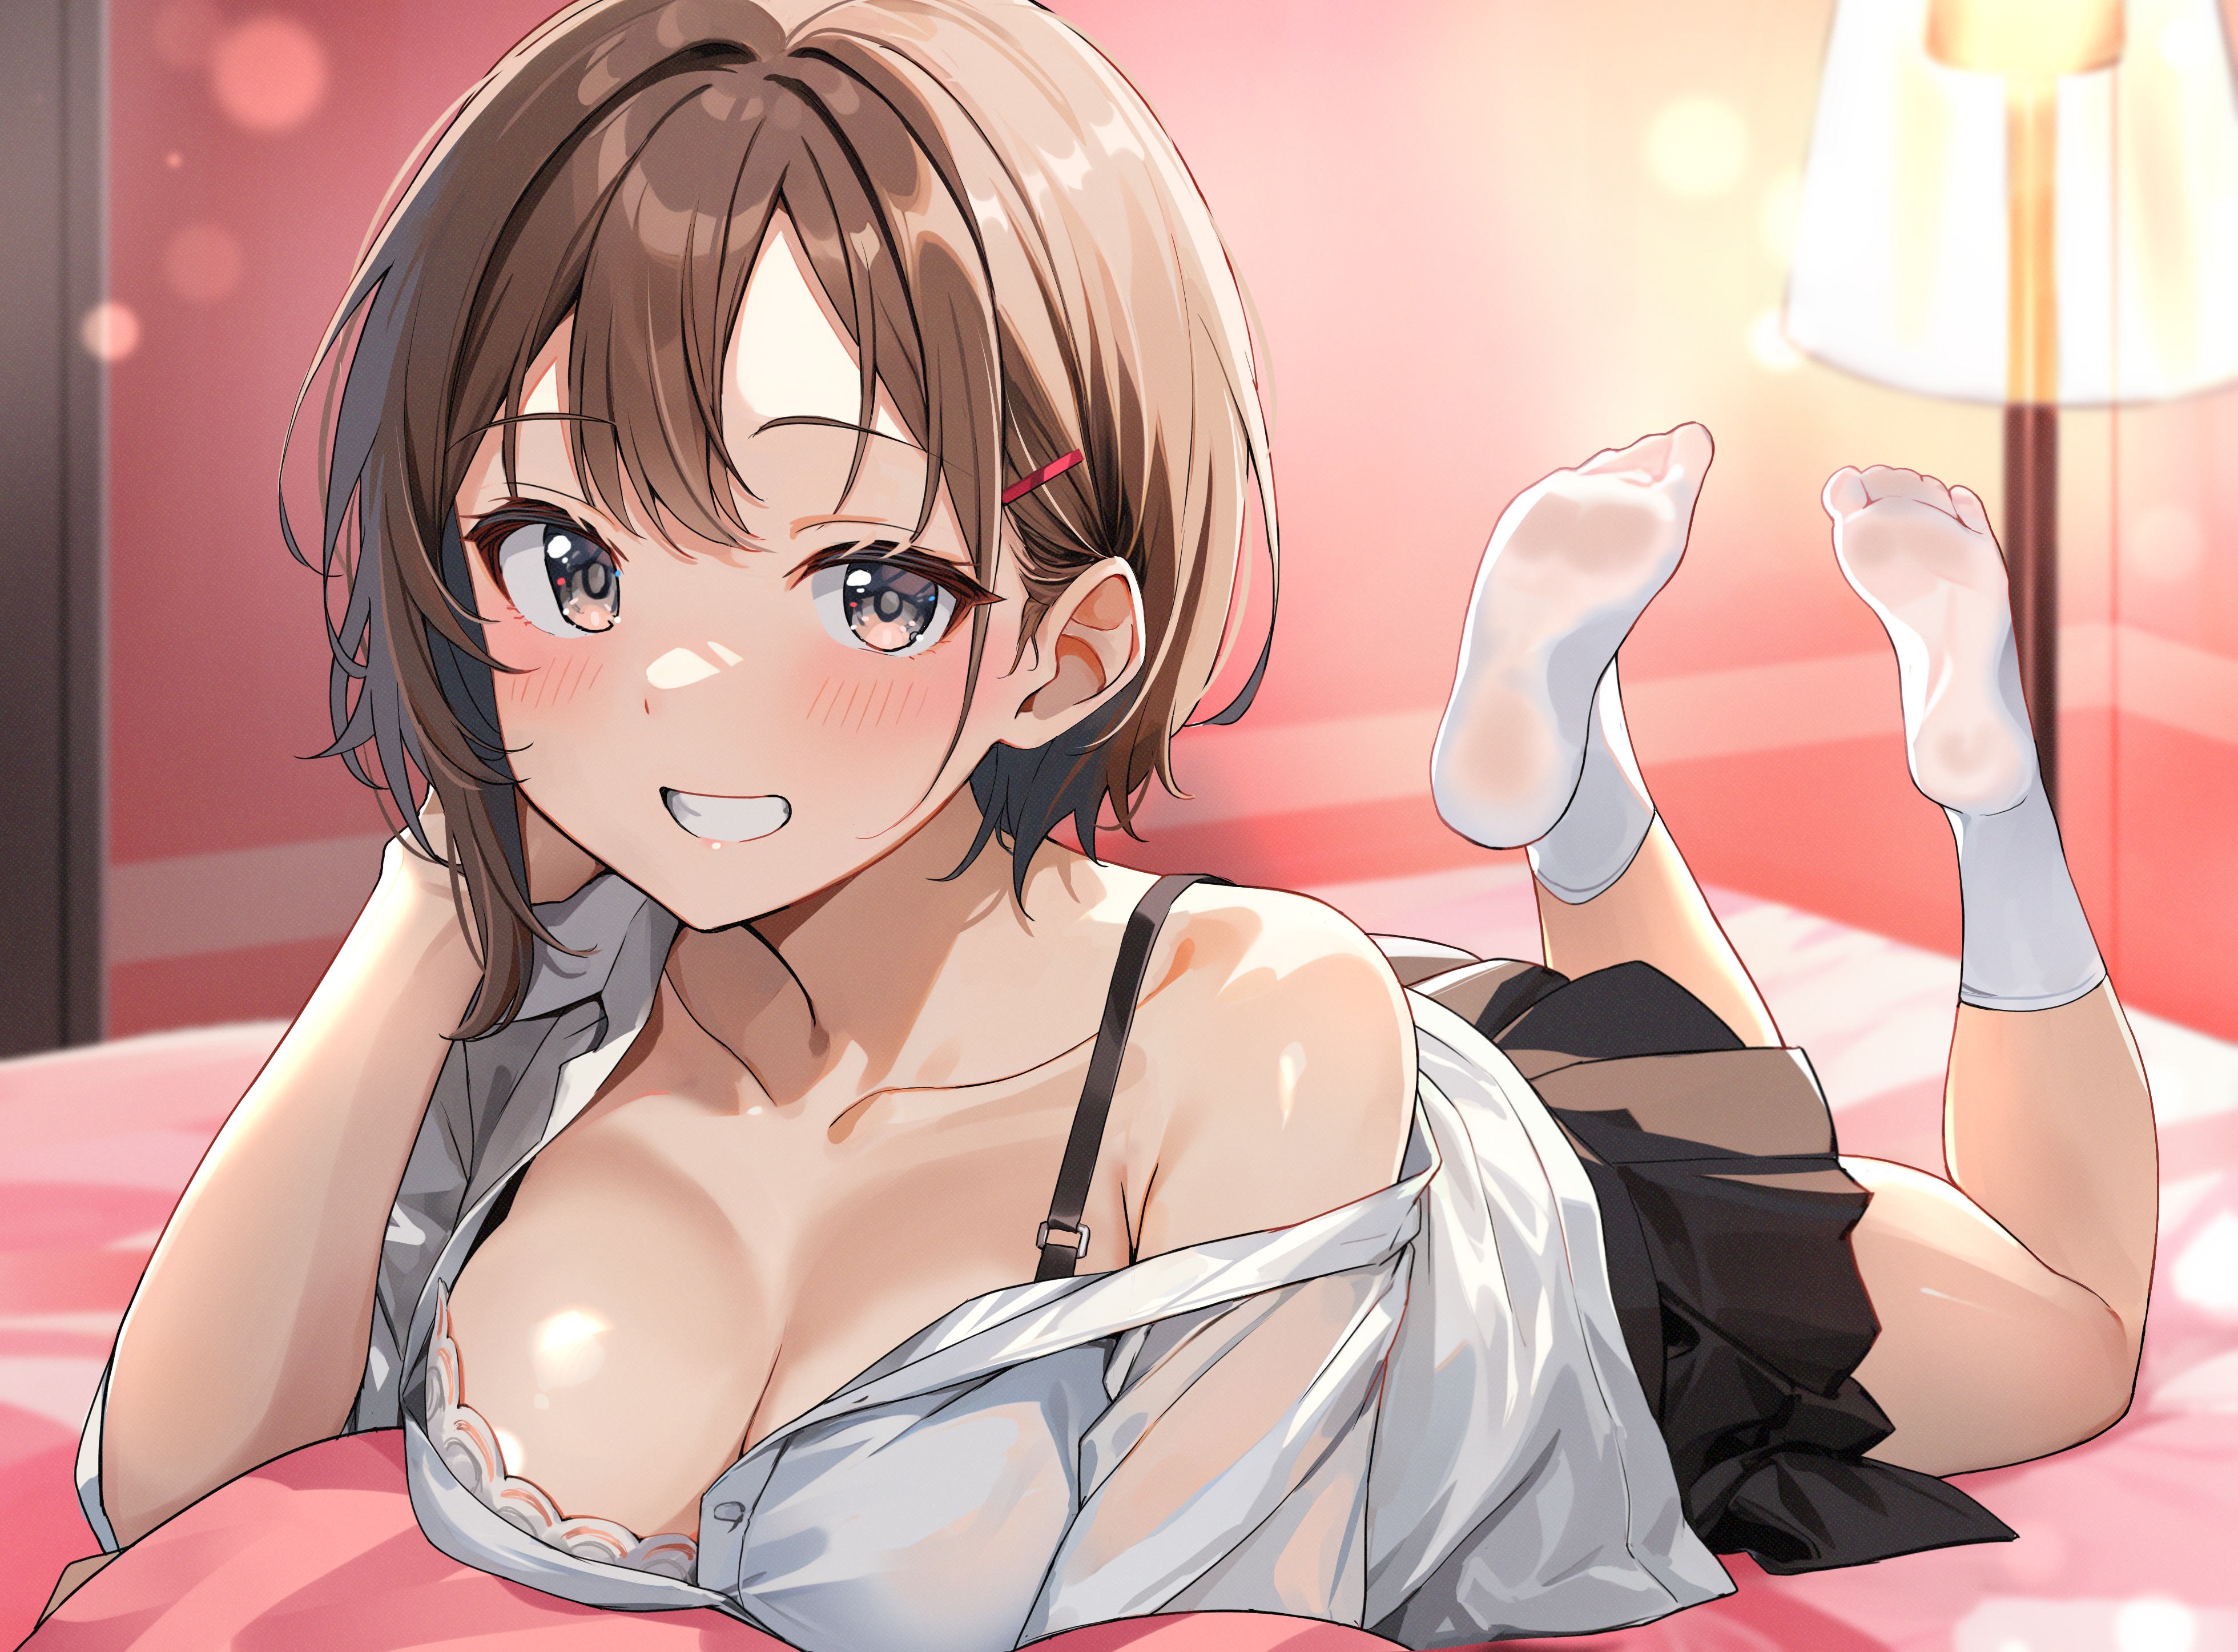 Anime 3920x2894 anime anime girls boobs big boobs Shiitake Taishi blushing short hair feet in the air white socks socks looking at viewer in bed lying down lying on front collarbone cleavage hair between eyes brunette lamp bed hair clip brown eyes smiling pink sheets parted lips one bare shoulder teeth